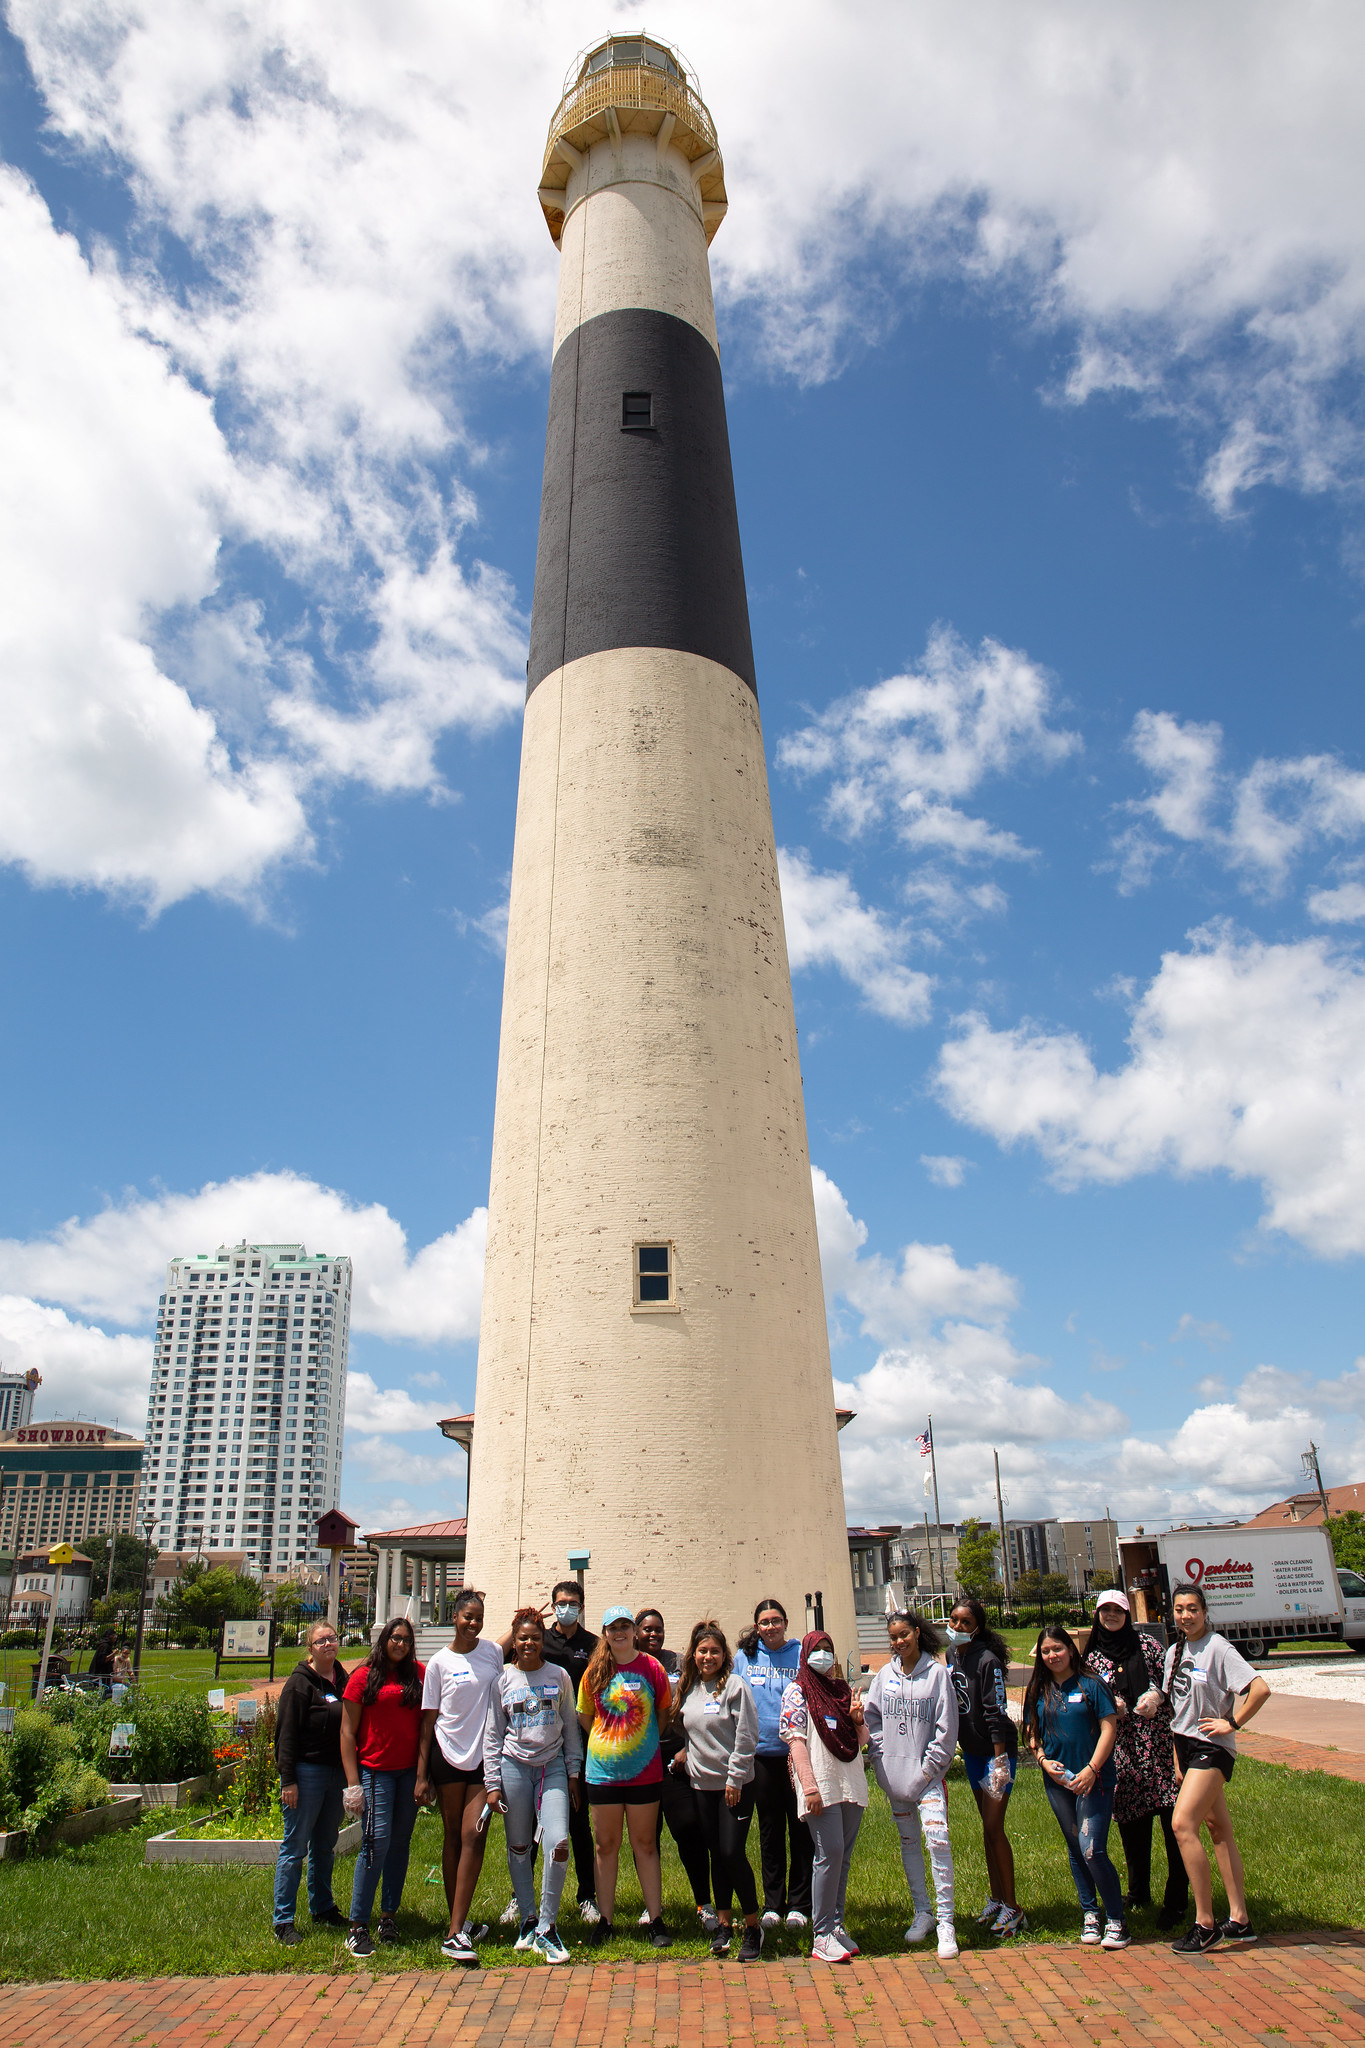 People standing in front of lighthouse